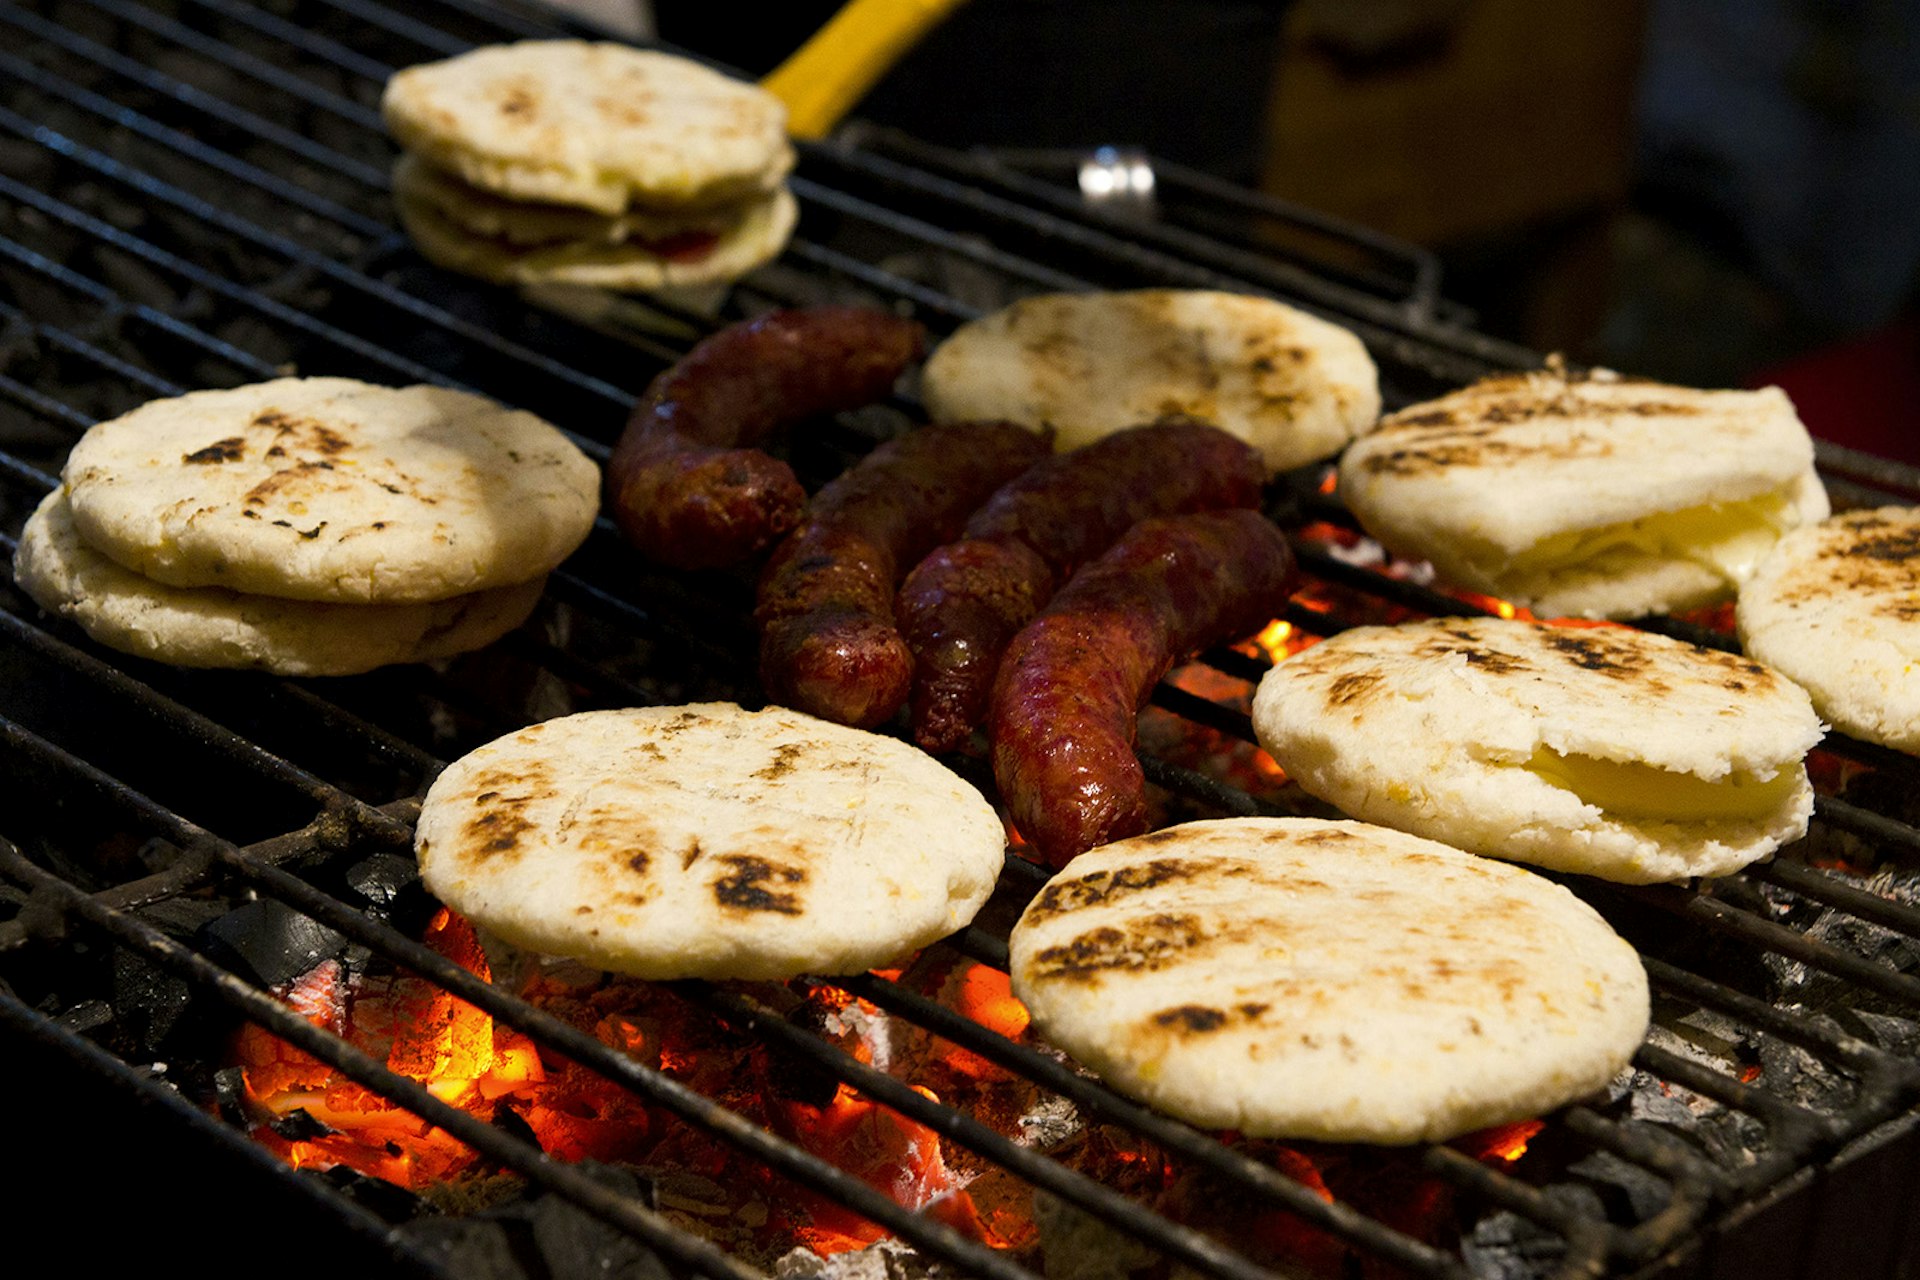 Colombian arepas on the grill with chorizo © William.neauheisel / CC BY 2.0